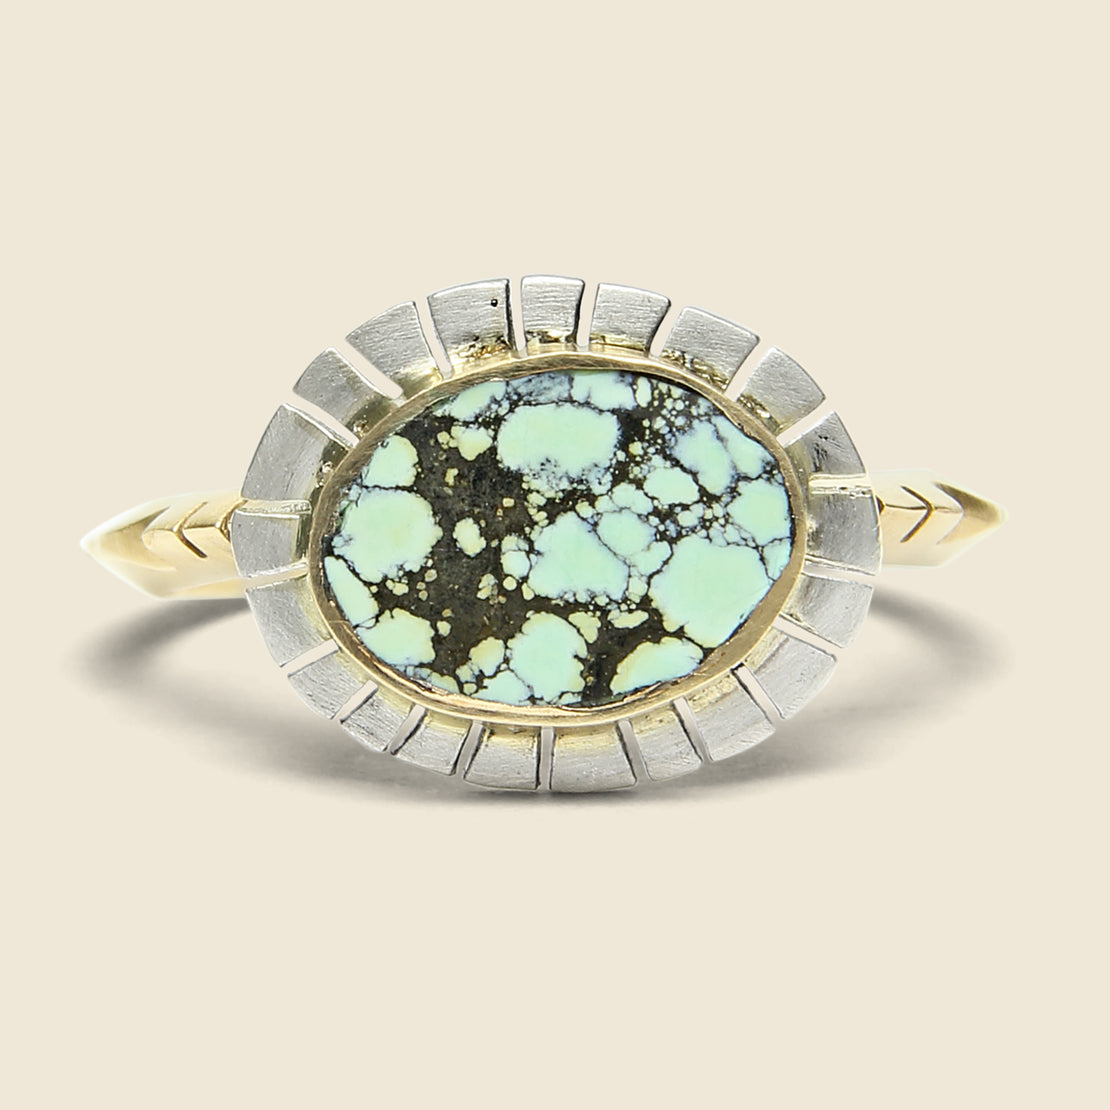 Equinox Ring - Peacock Turquoise - Young in the Mountains - STAG Provisions - W - Accessories - Ring